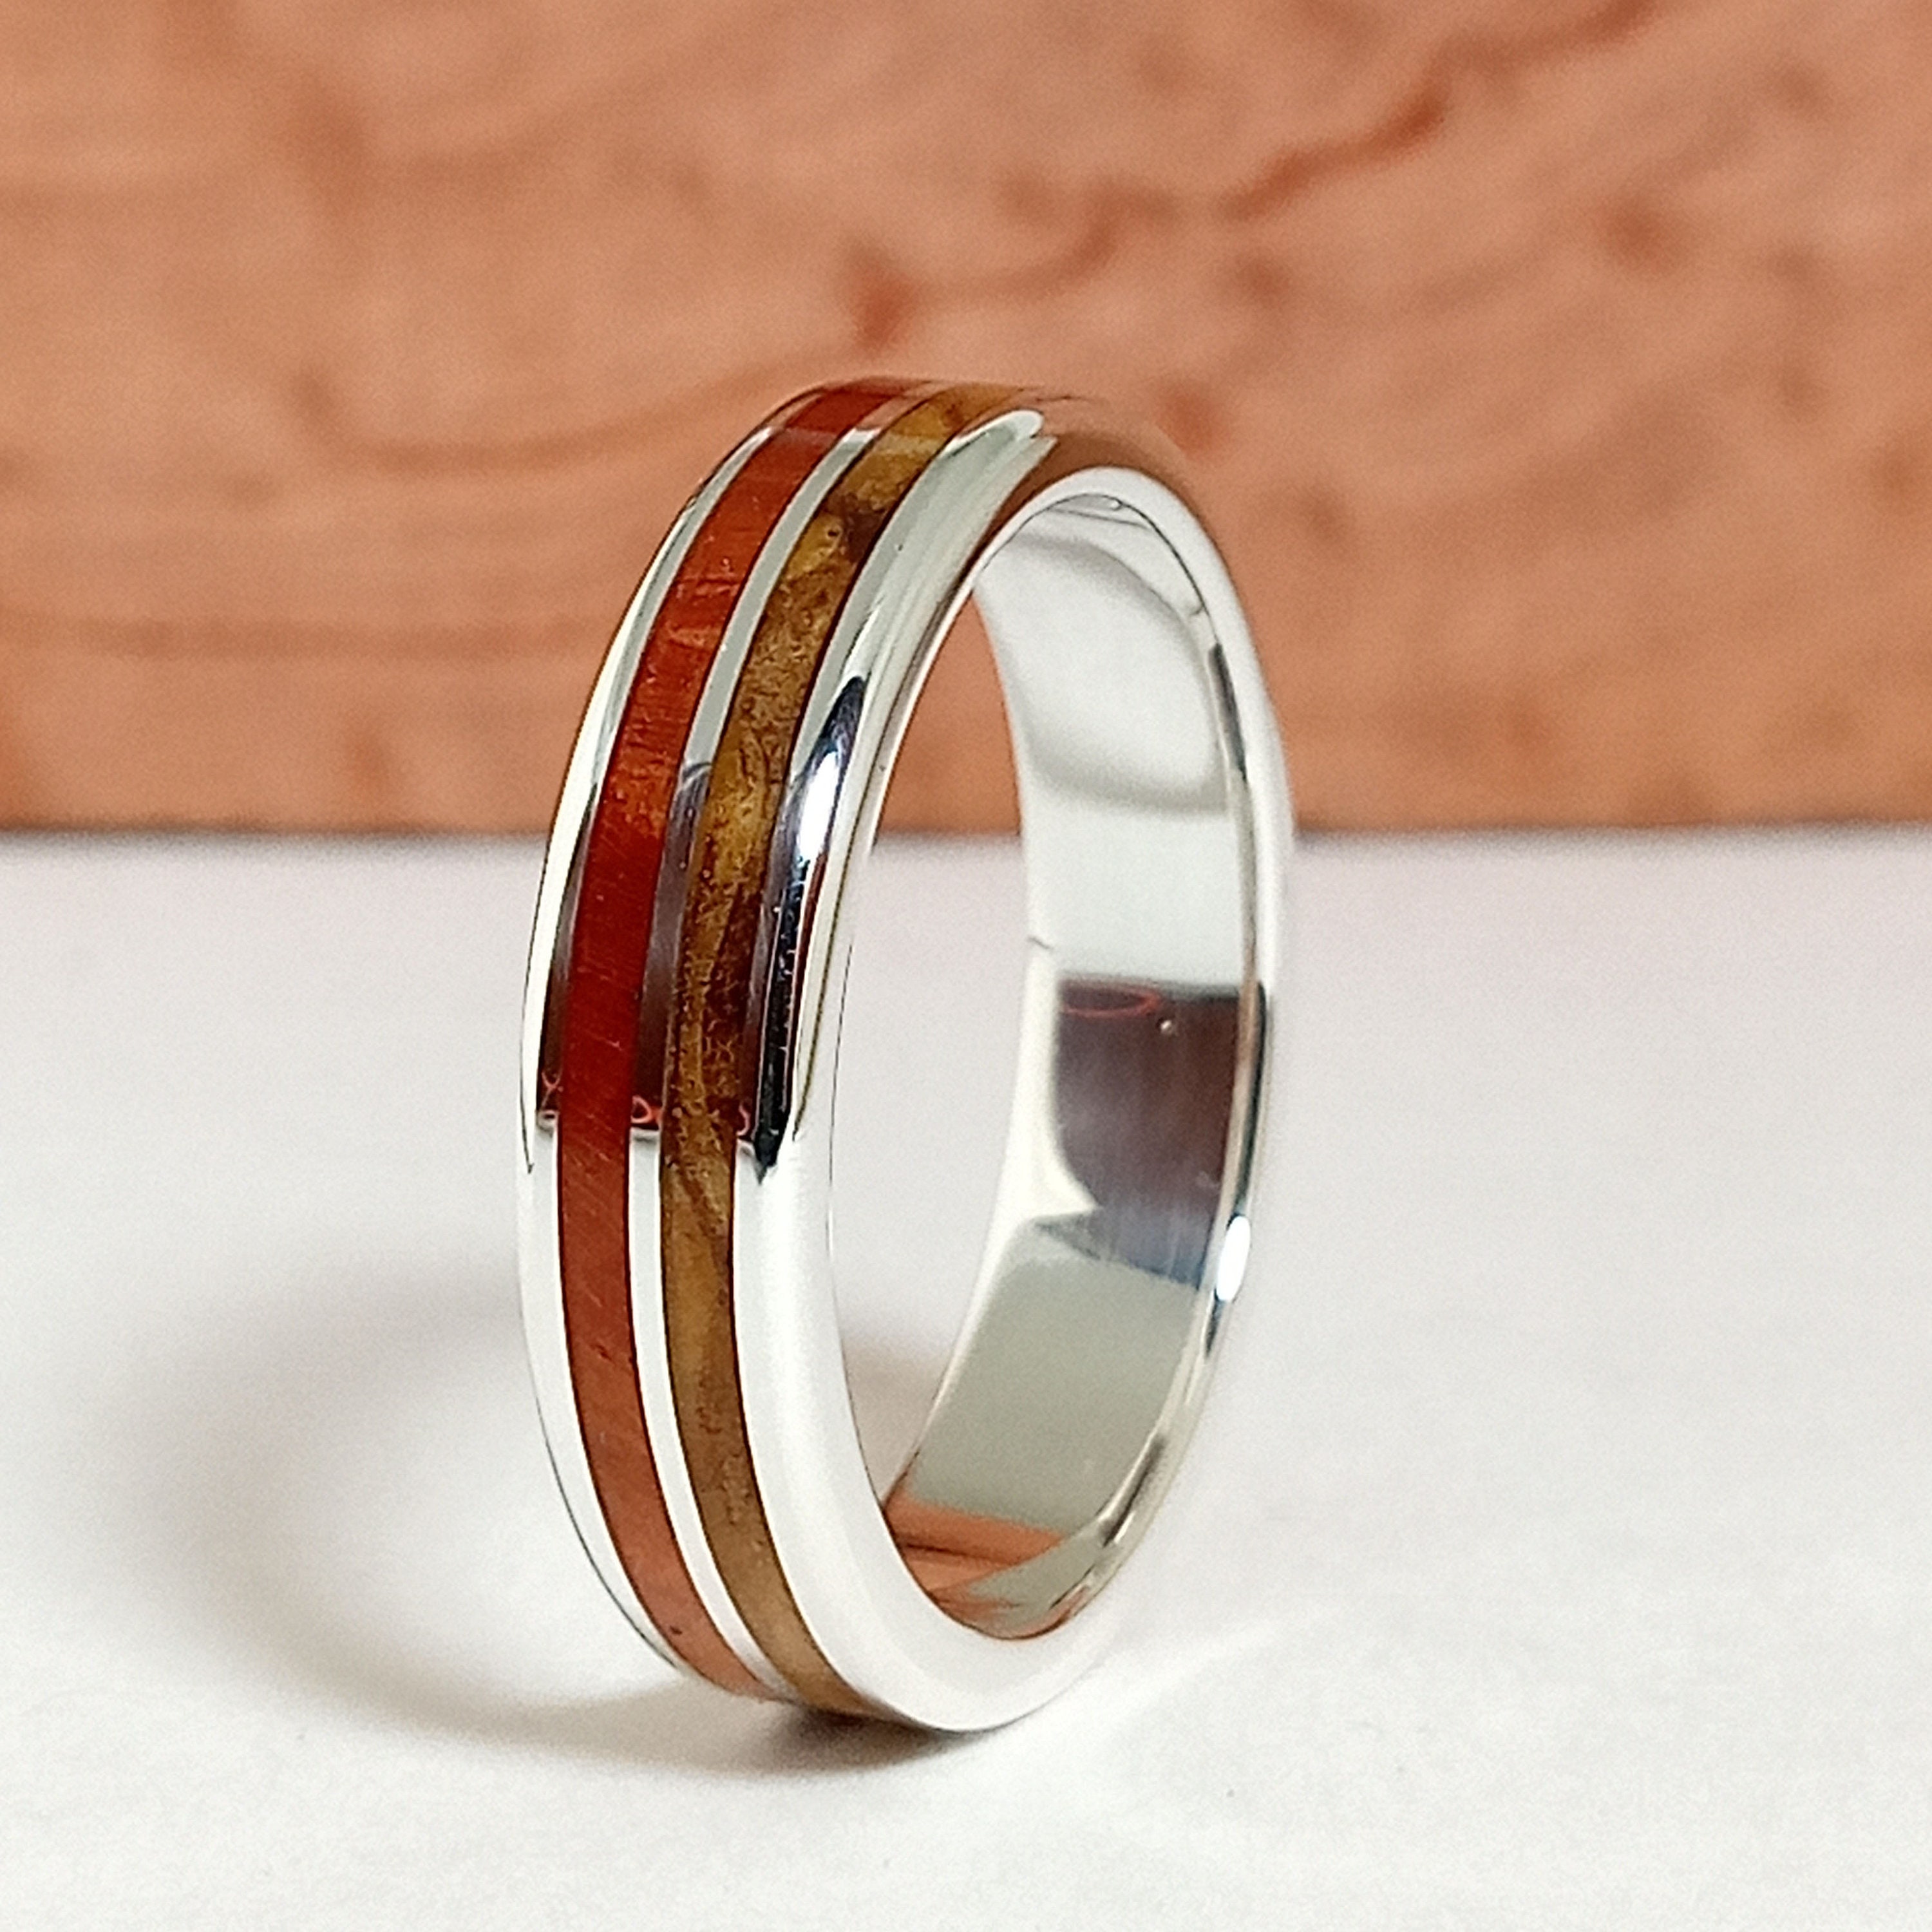 Wedding Ring Made With Wood Briar Root and Olive Silver